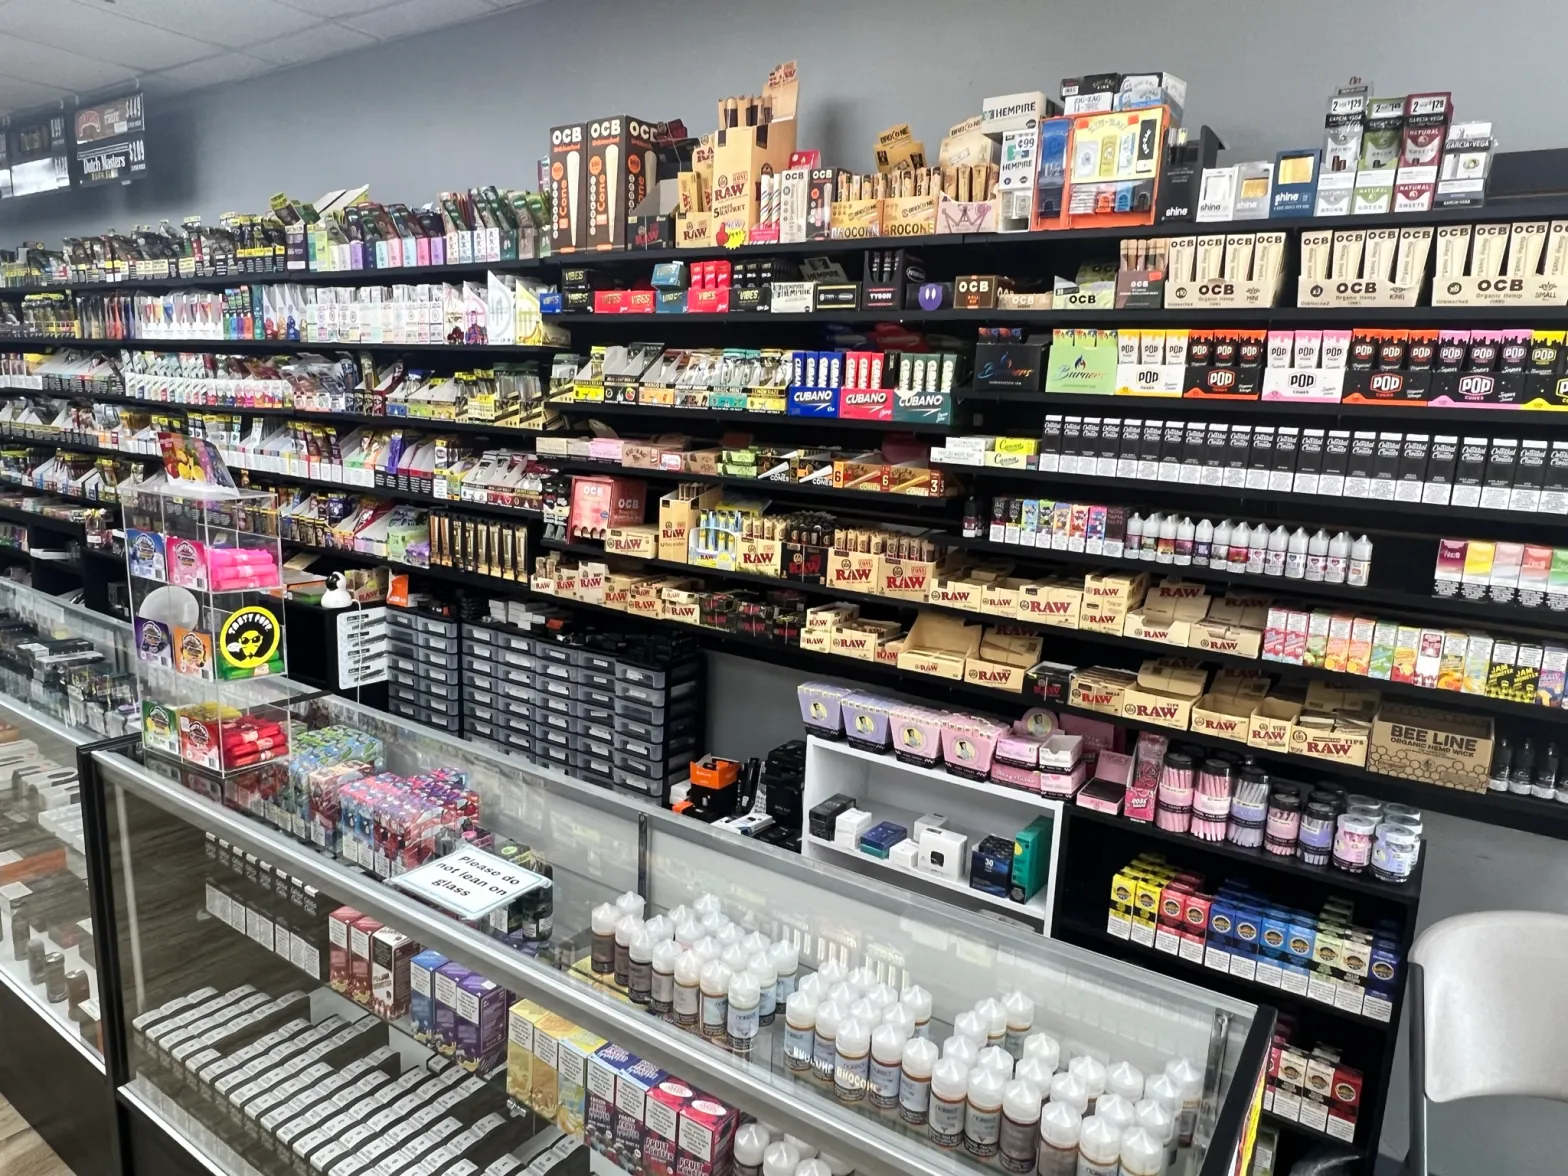 The Ultimate Vaping Paradise: Inside the Vaping Essentials Store